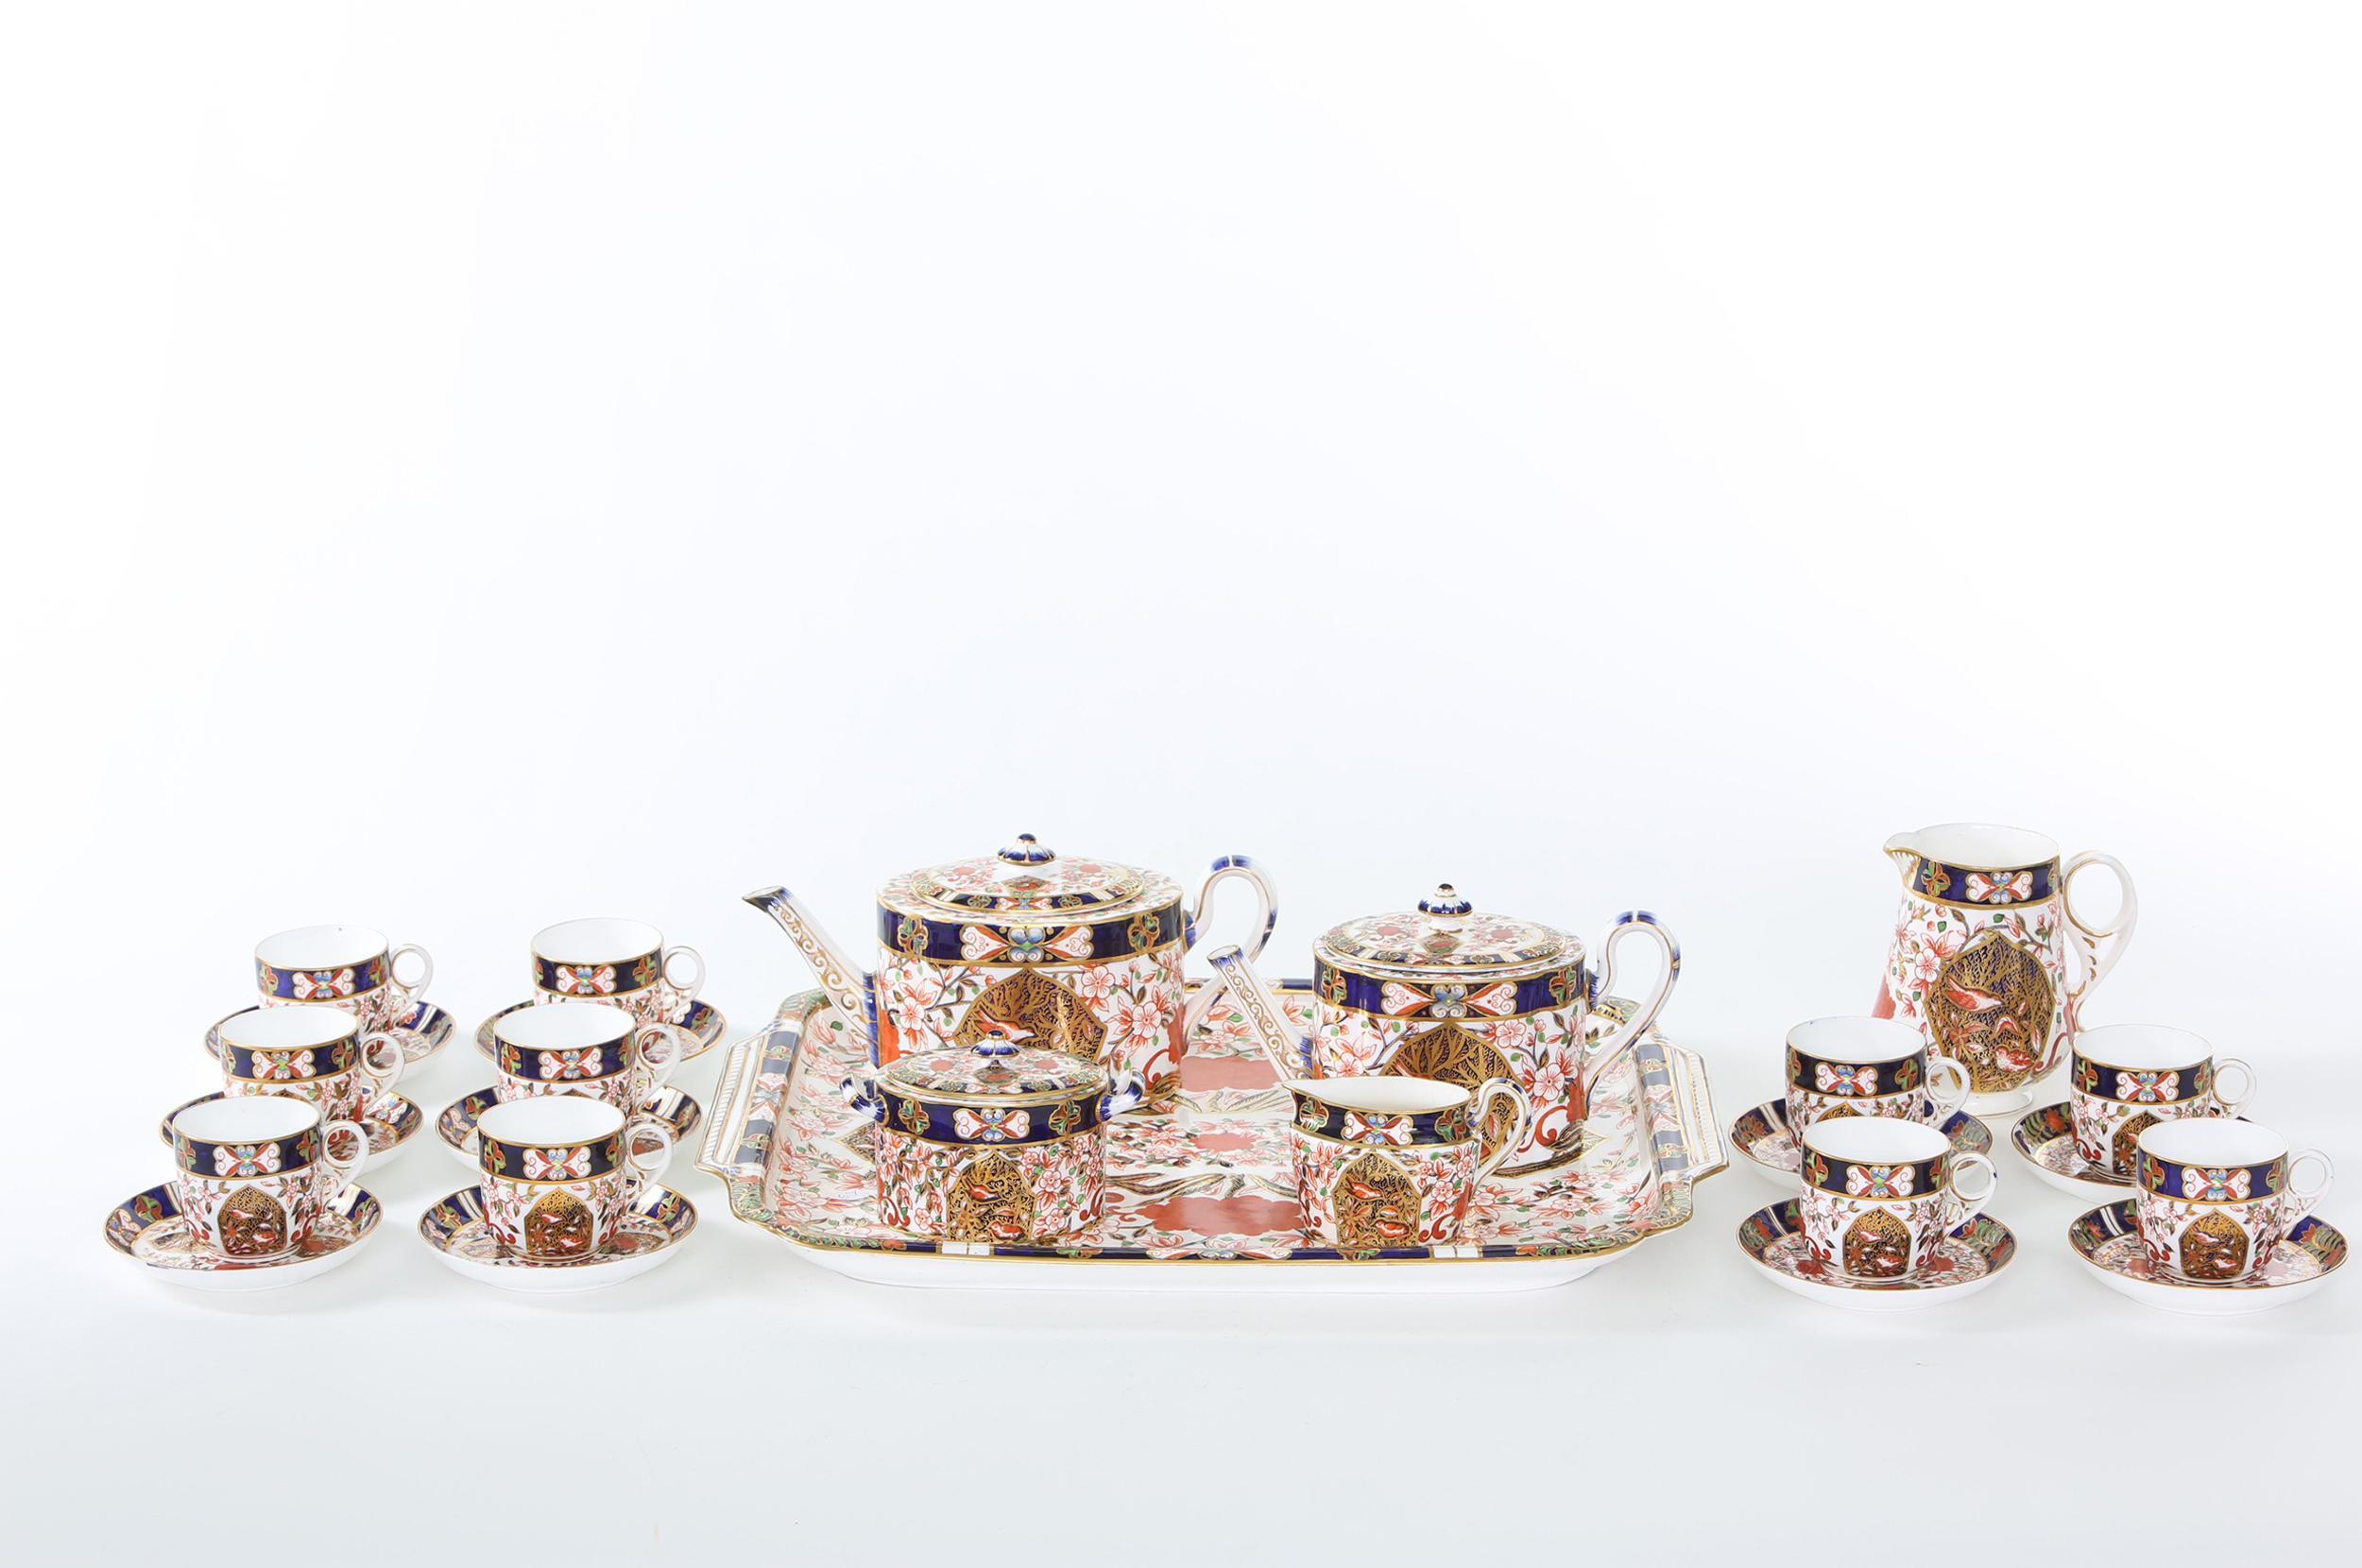 19th century English Royal Crown Derby Porcelain tea / coffee service for ten people. Each piece is in great antique condition. Maker's mark undersigned with Red Iron Mark 198. Service include tea pot 9.5